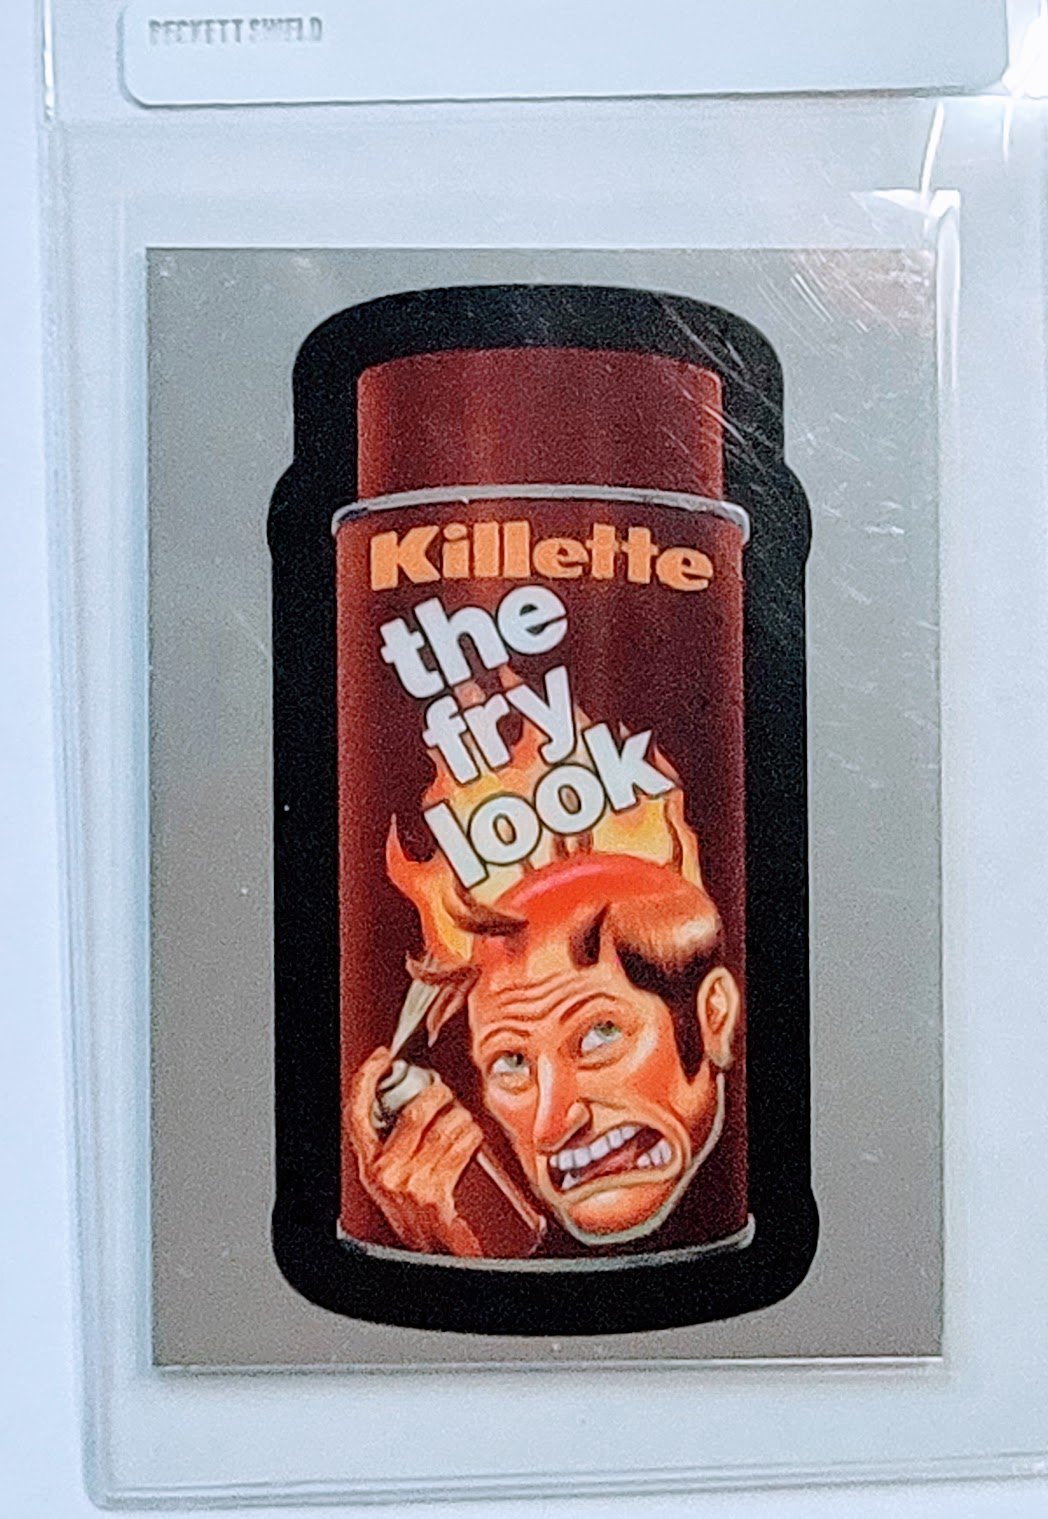 2014 Topps Wacky Packages Chrome Killete the Fry Look Sticker Card AVM1 simple Xclusive Collectibles   